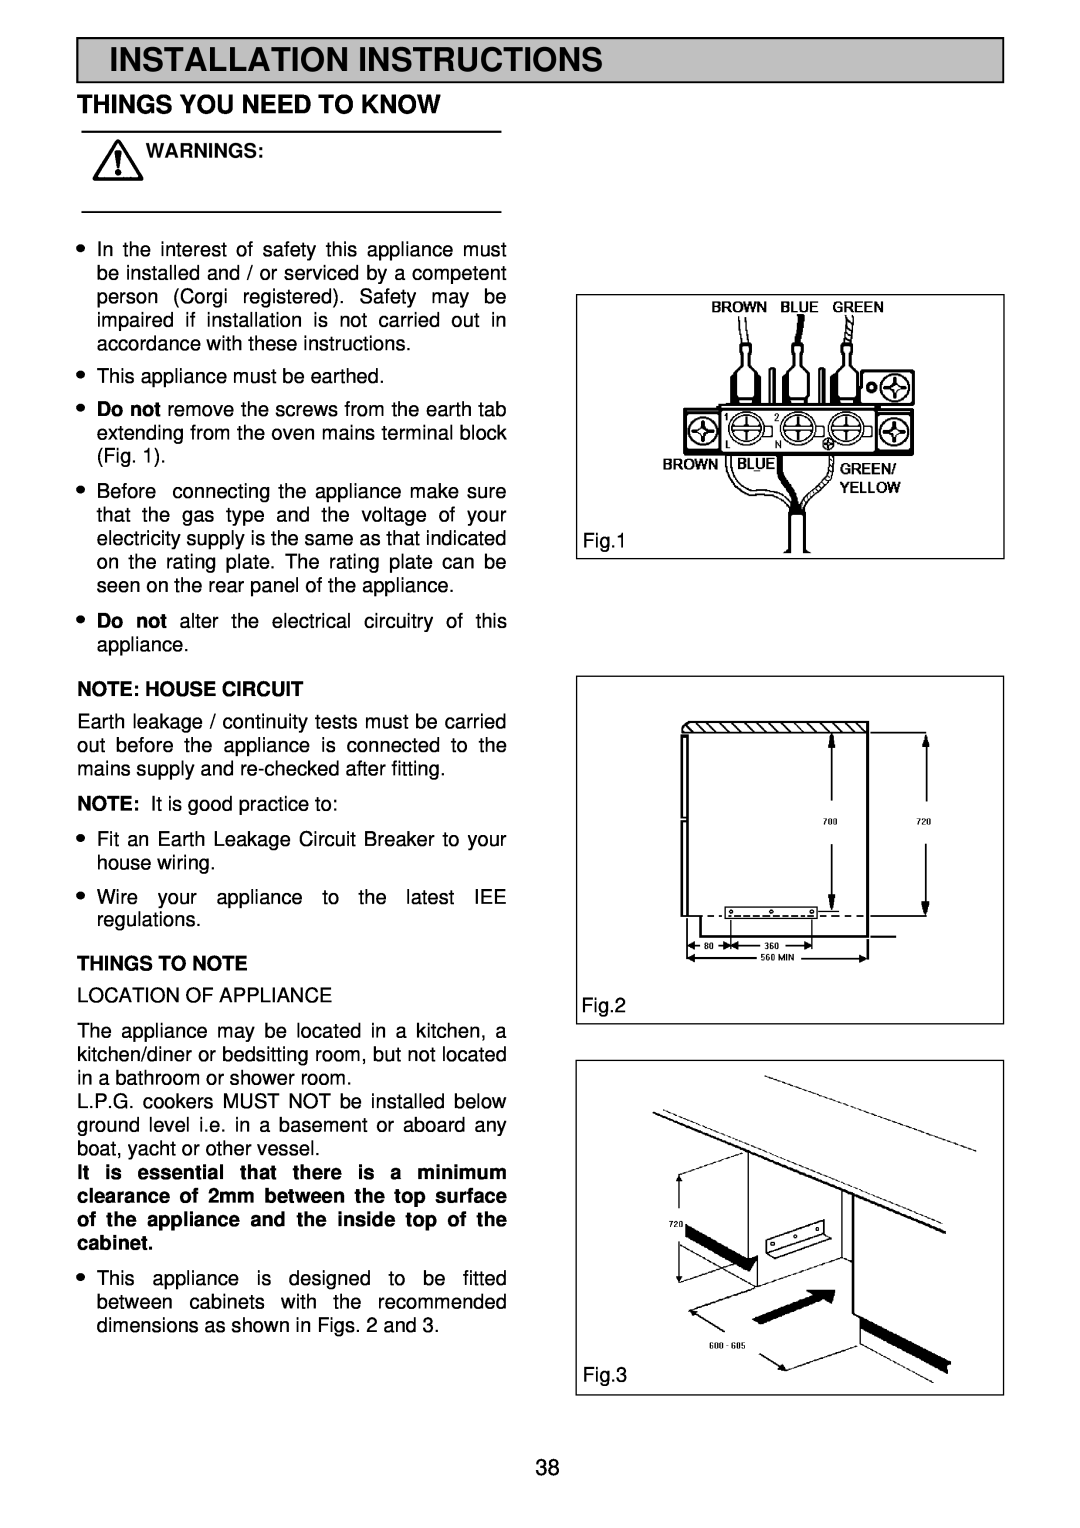 Electrolux EDB 876 manual Installation Instructions, Things You Need To Know, Warnings, Note House Circuit, Things To Note 